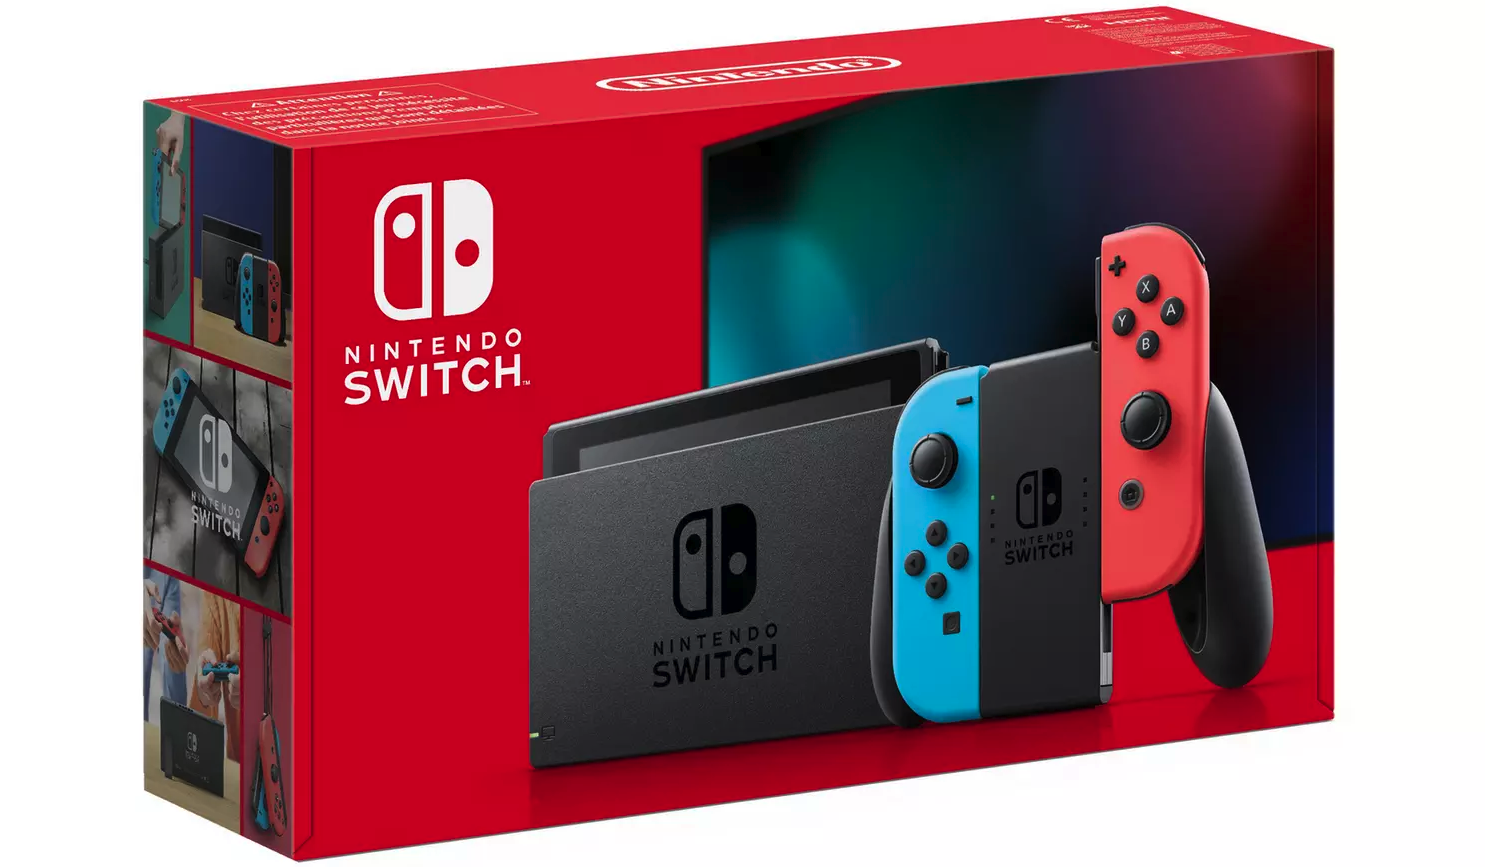 Nintendo Switch Console – Neon with improved battery